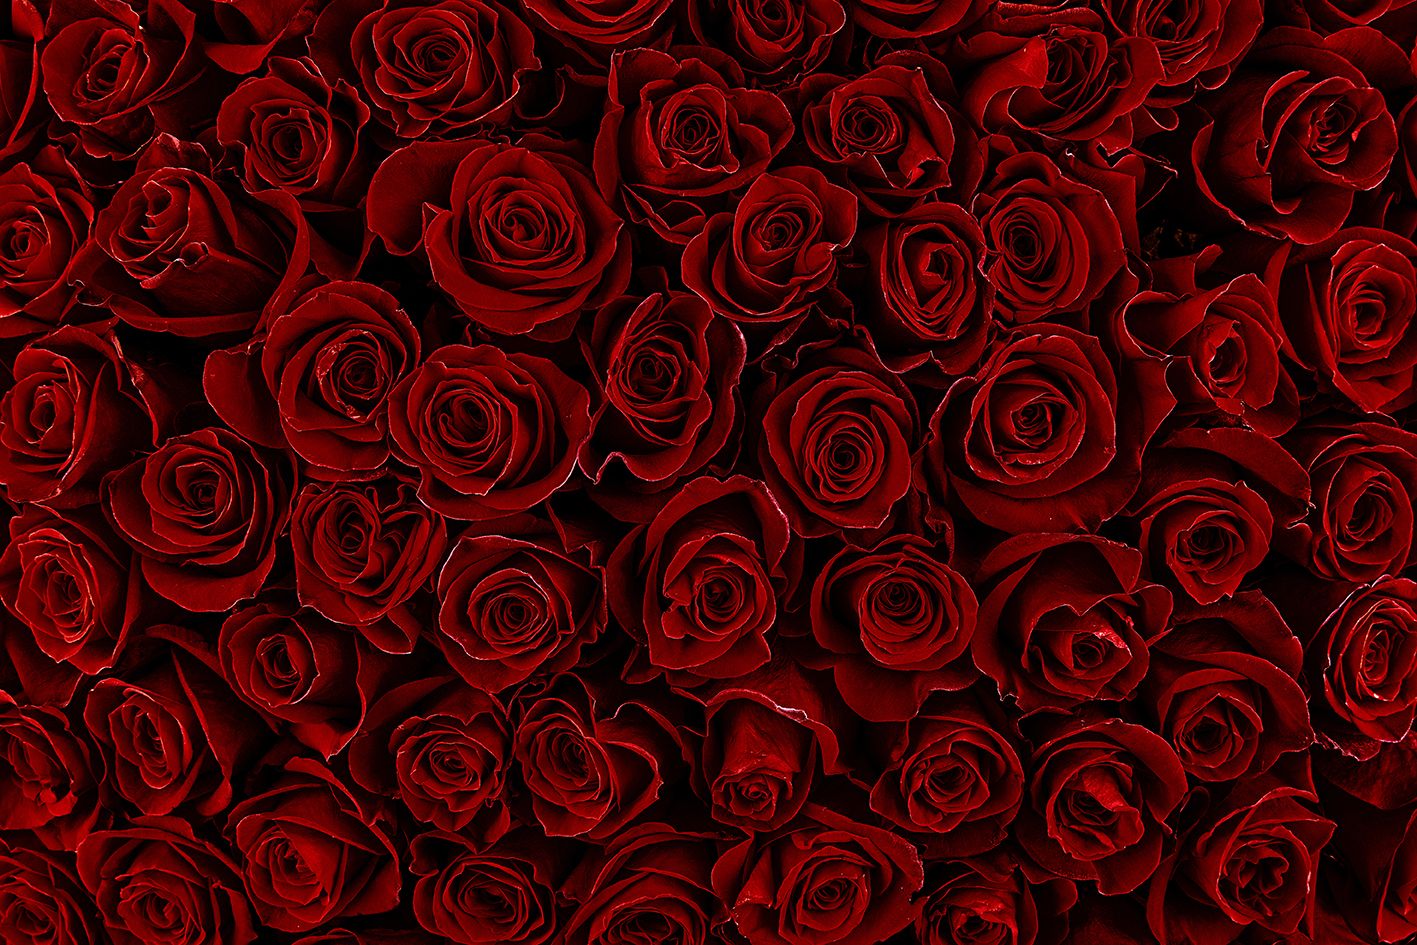 Rose Meanings - The Red Rose